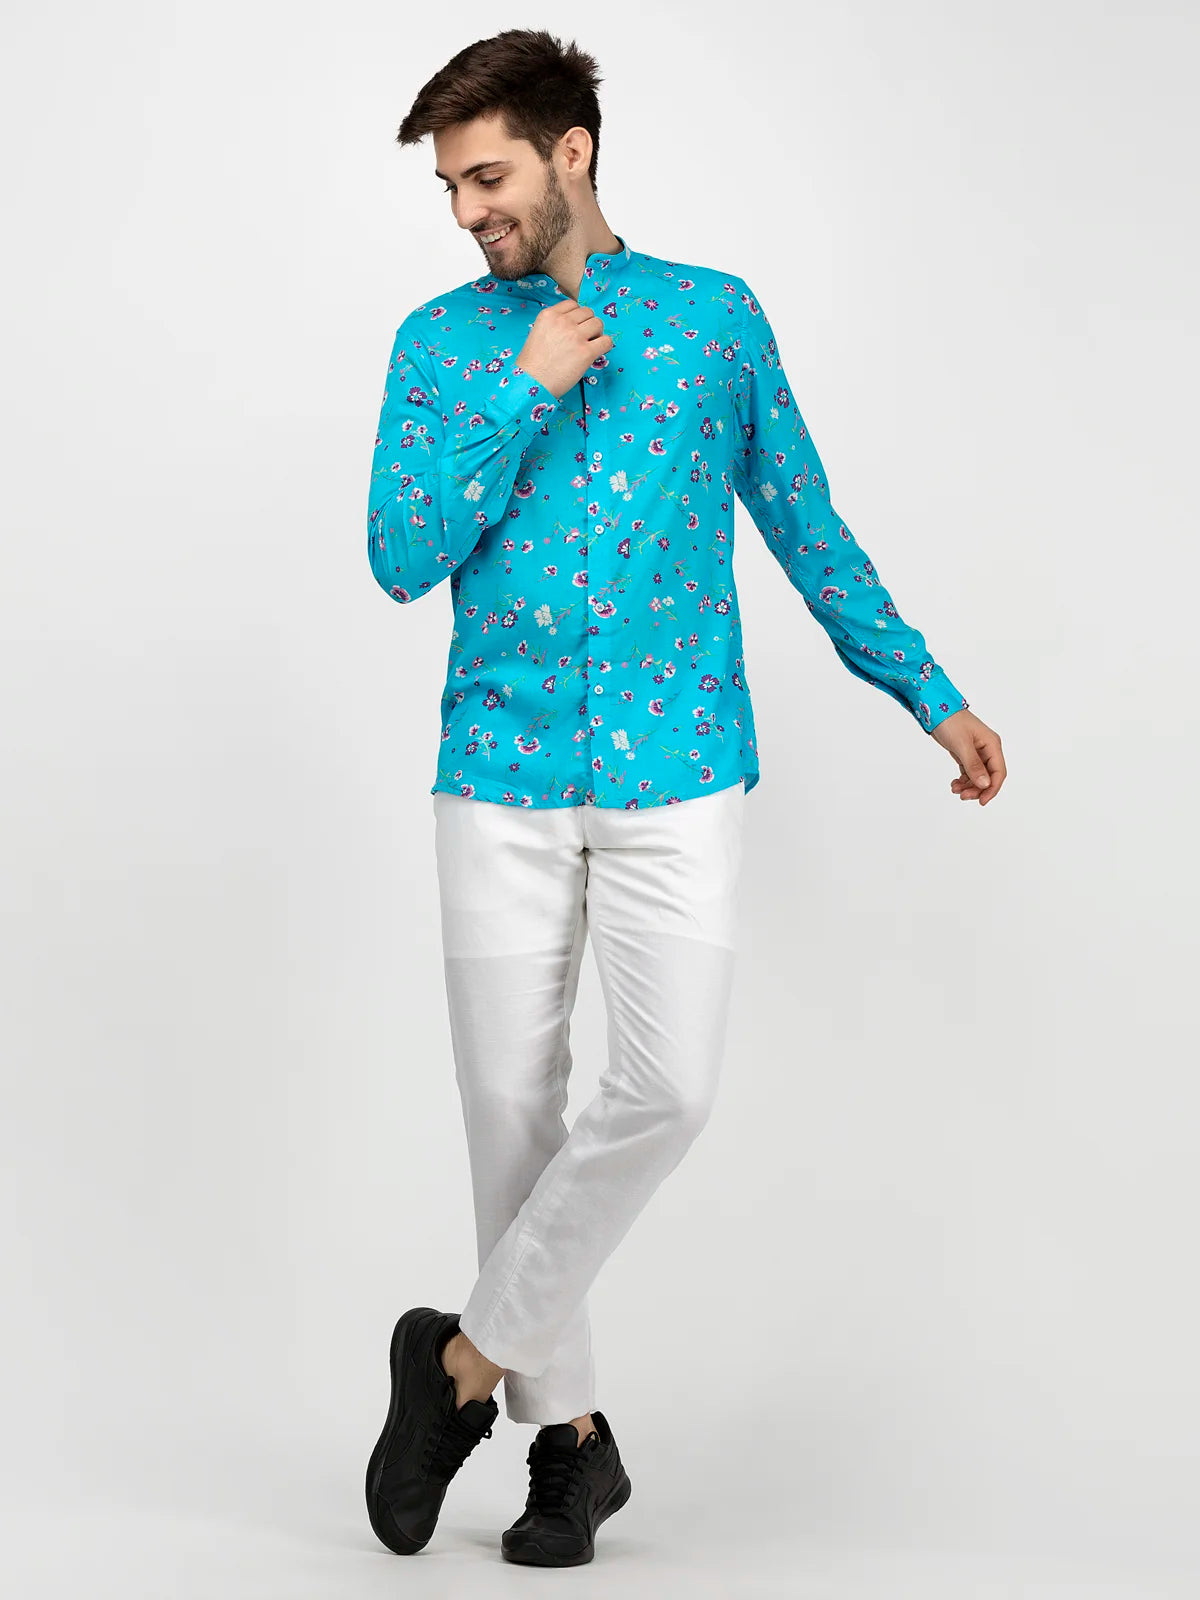 SKY BLUE Floral Green Hill Rayon Shirt Chinese Colar